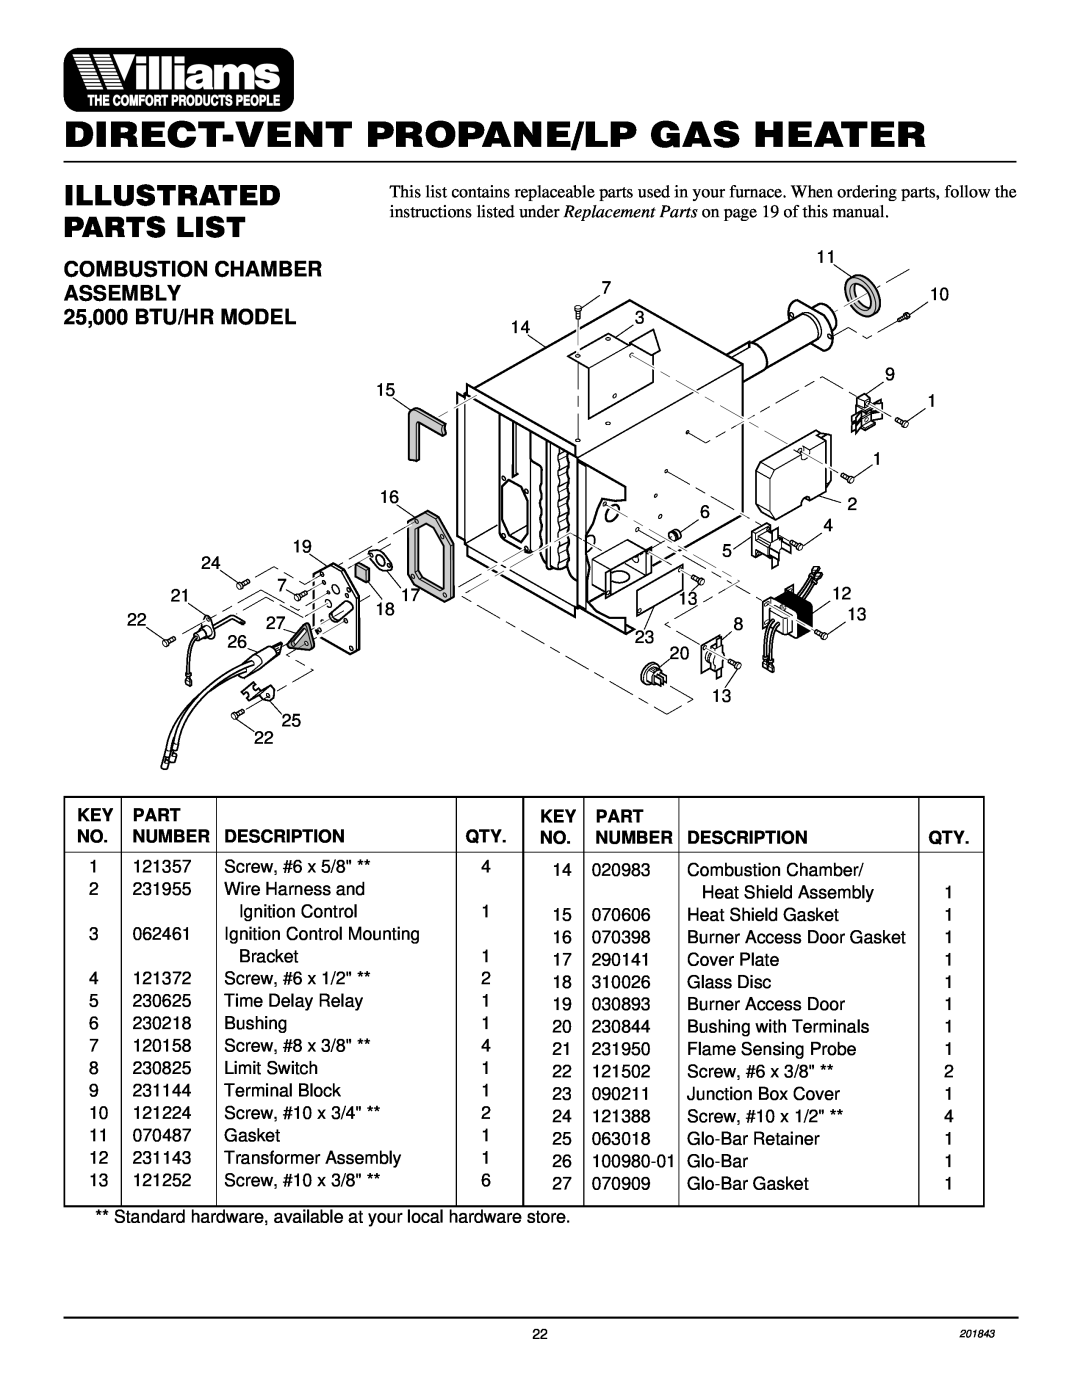 Williams 2503531, 4003531 Direct-Ventpropane/Lp Gas Heater, Illustrated Parts List, Combustion Chamber Assembly 